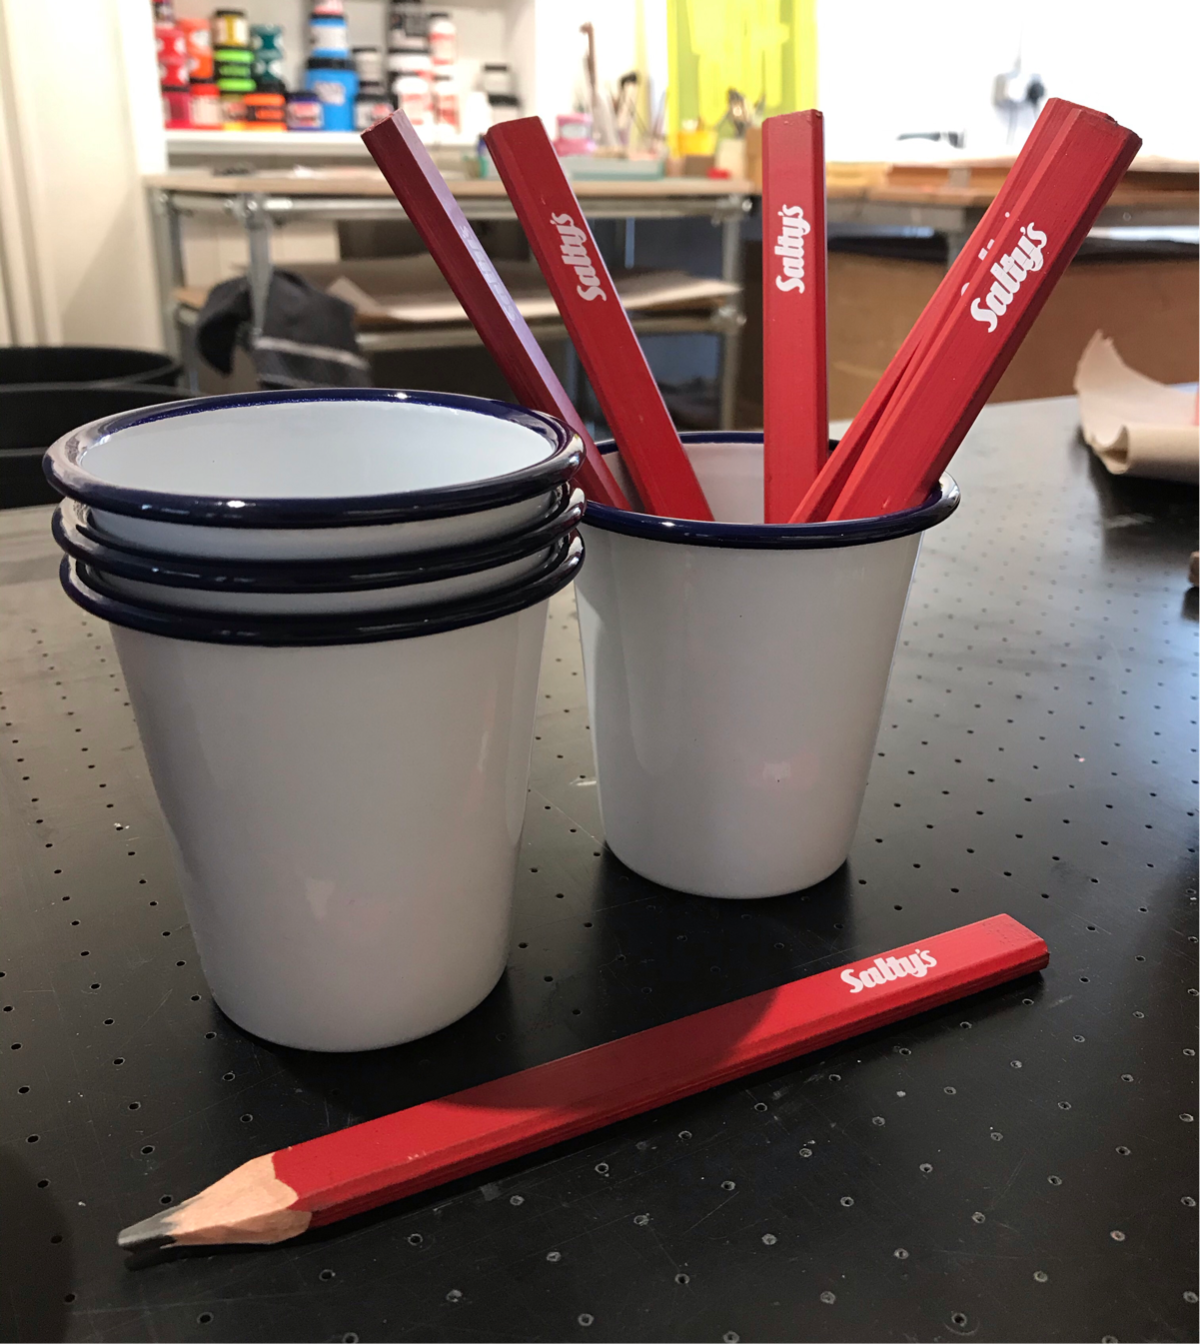 Some red carpenters pencils in white Falconware tumbler pots. Sat on a print table and pots of ink in the background.